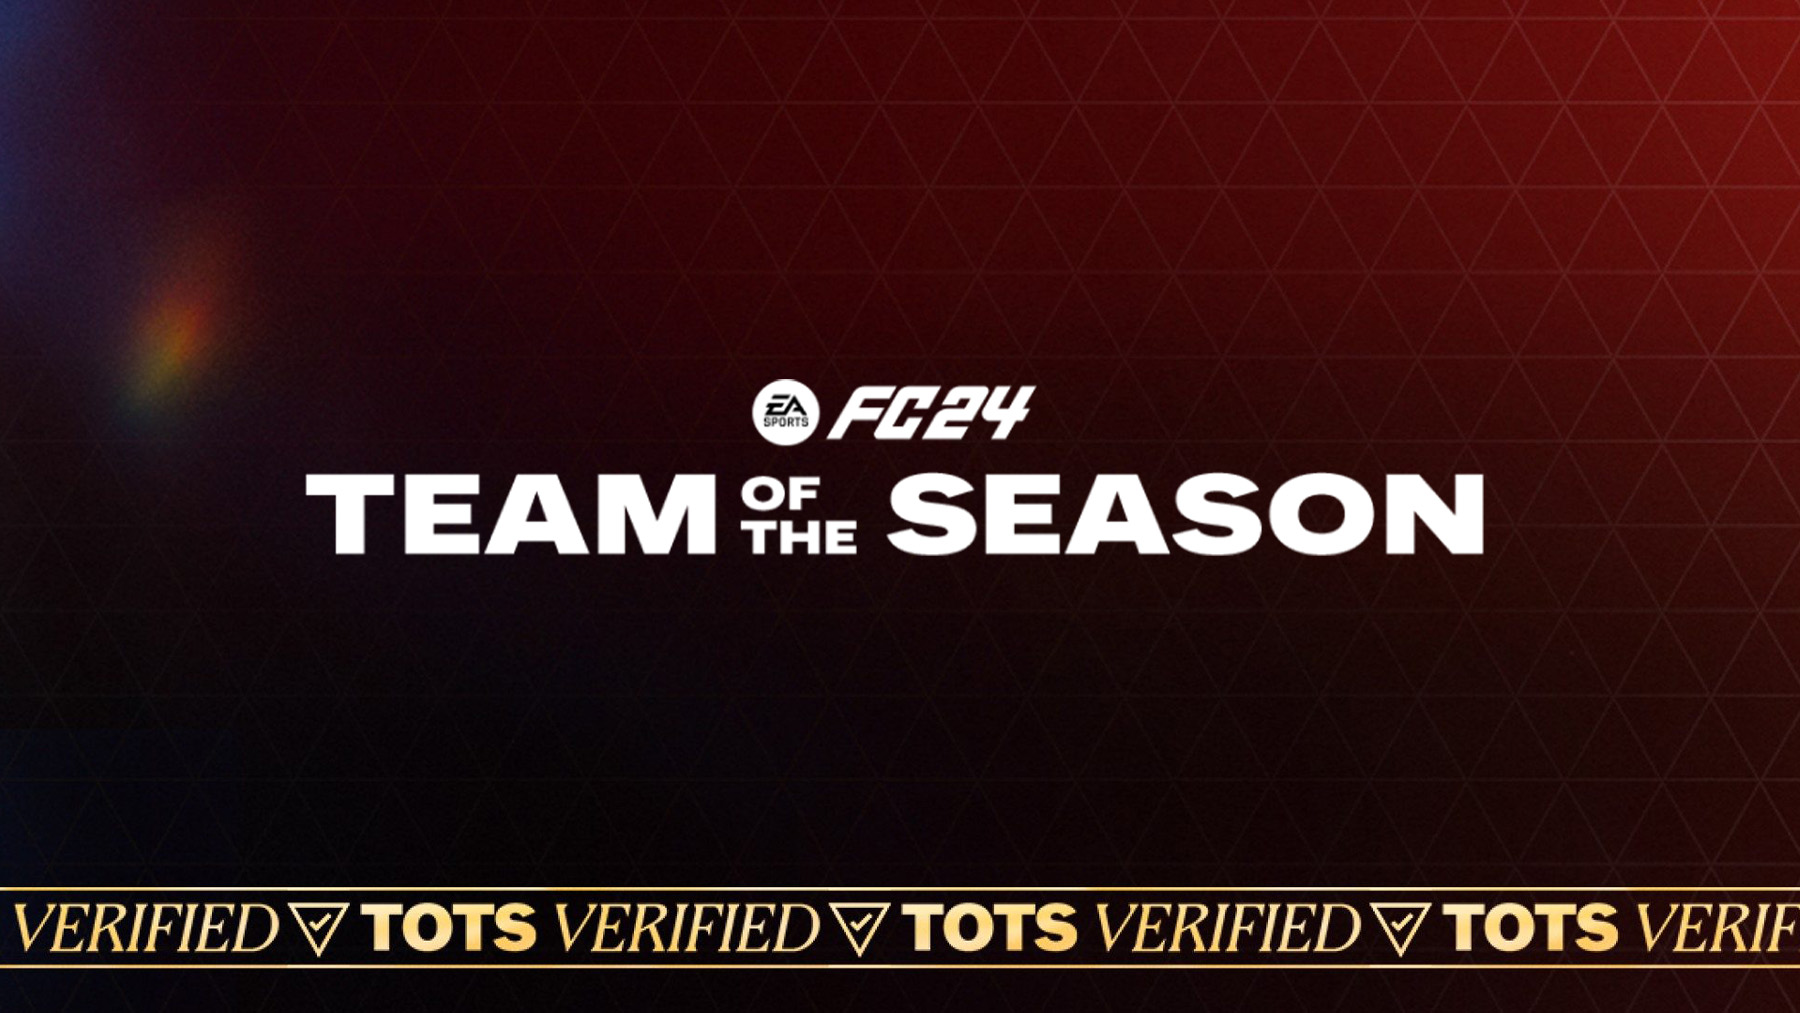 EA Sports FC 24 Team of the Season (TOTS) - The complete info, voting and squads list.